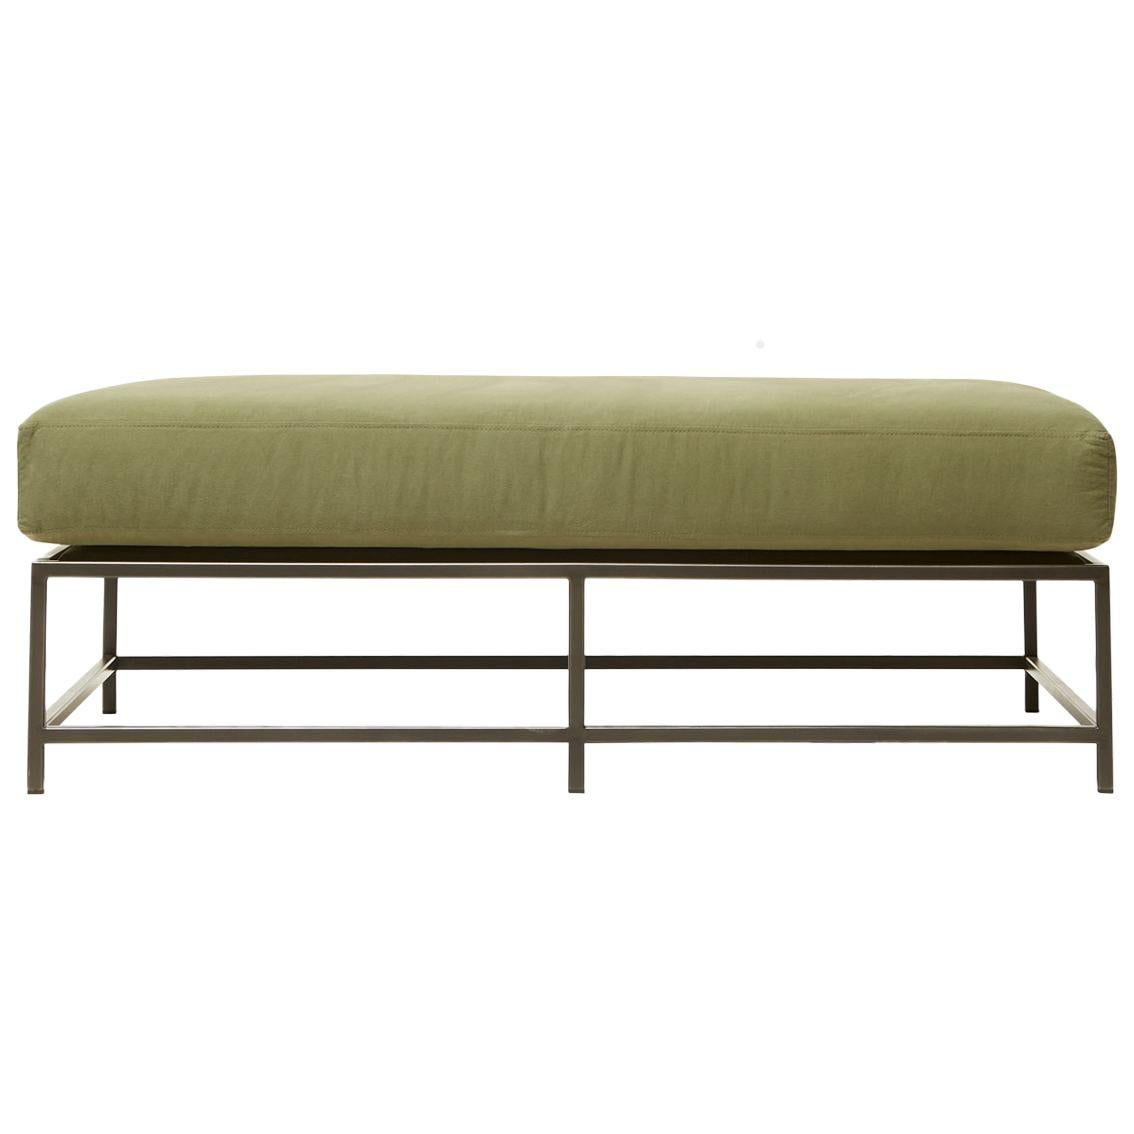 Olive Canvas and Blackened Steel Bench